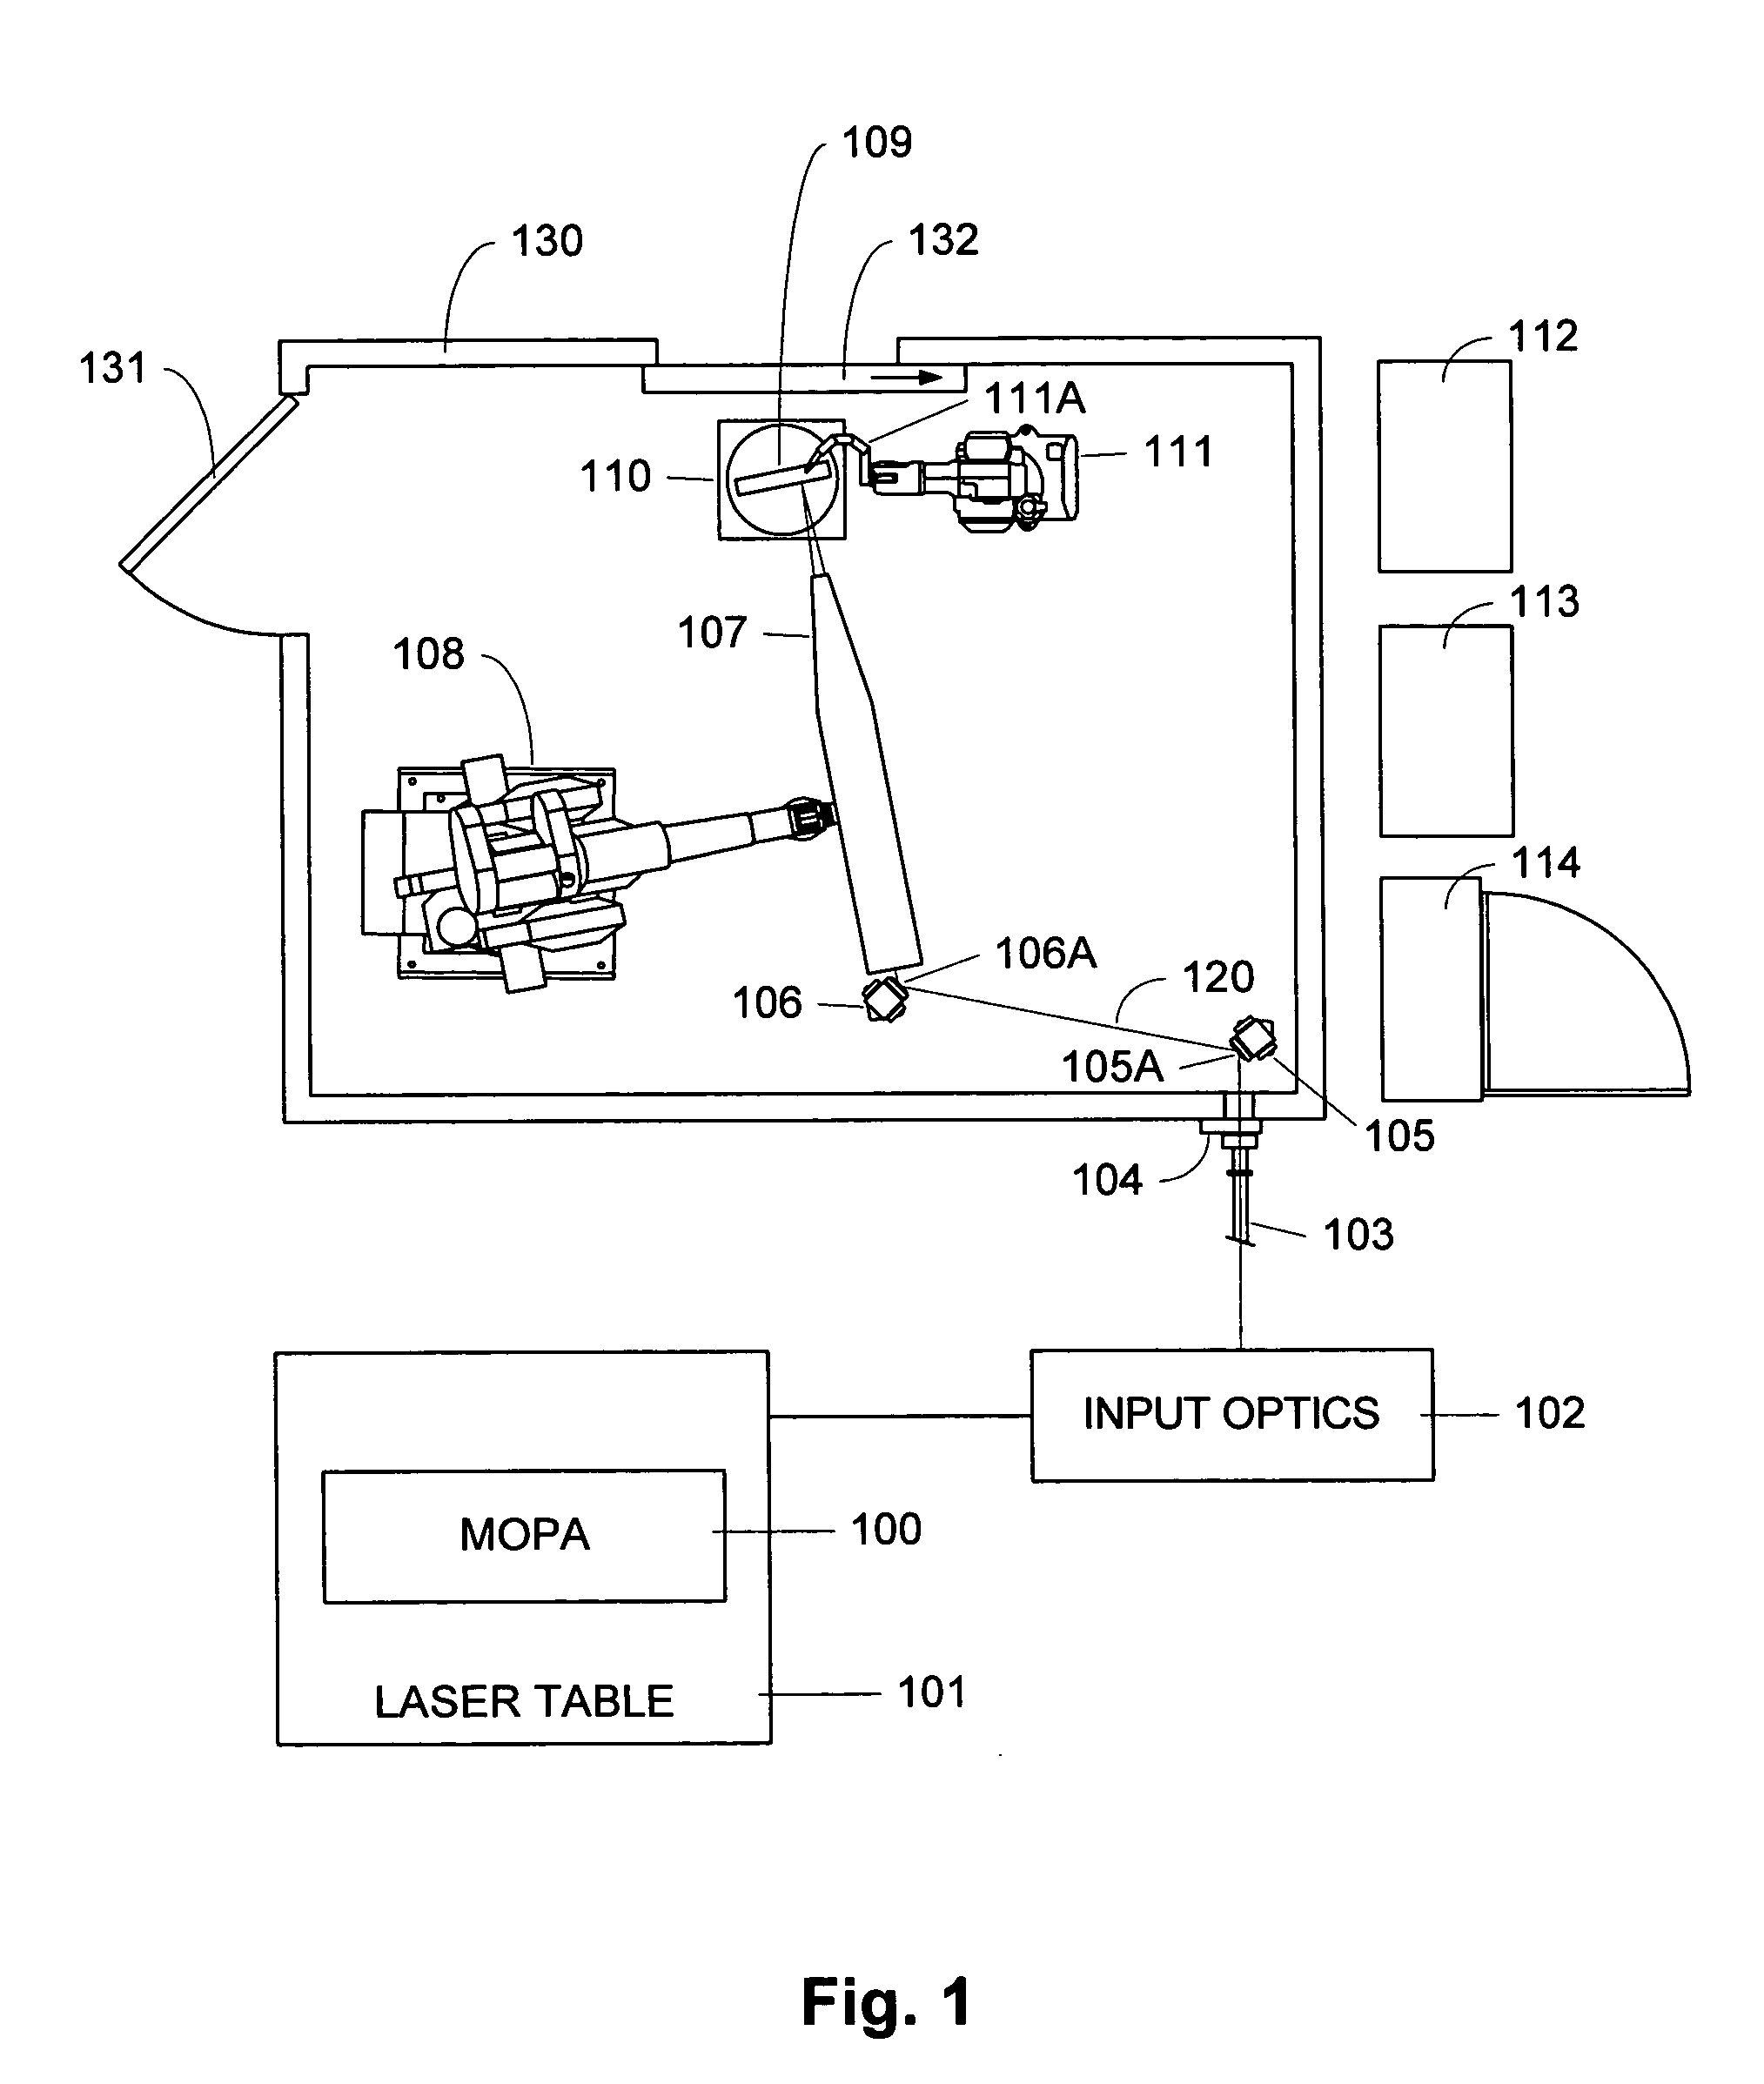 Active beam delivery system with variable optical path segment through air